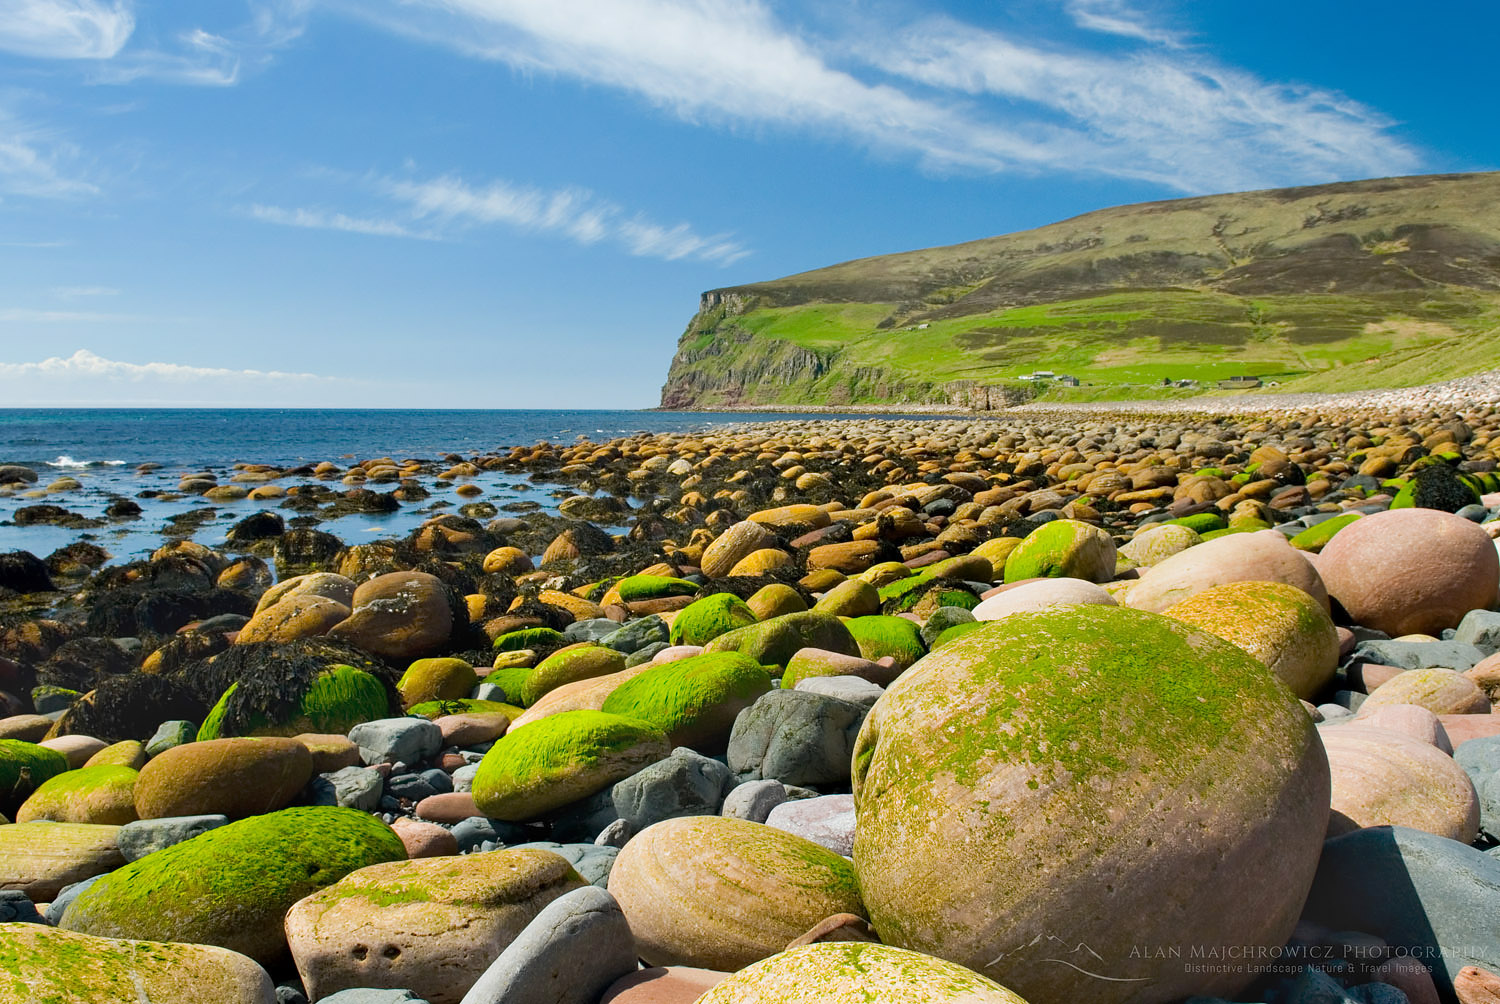 Giant rounded cobblestones lining the beach at Rackwick Isle of Hoy, Orkney Islands Scotland #12646